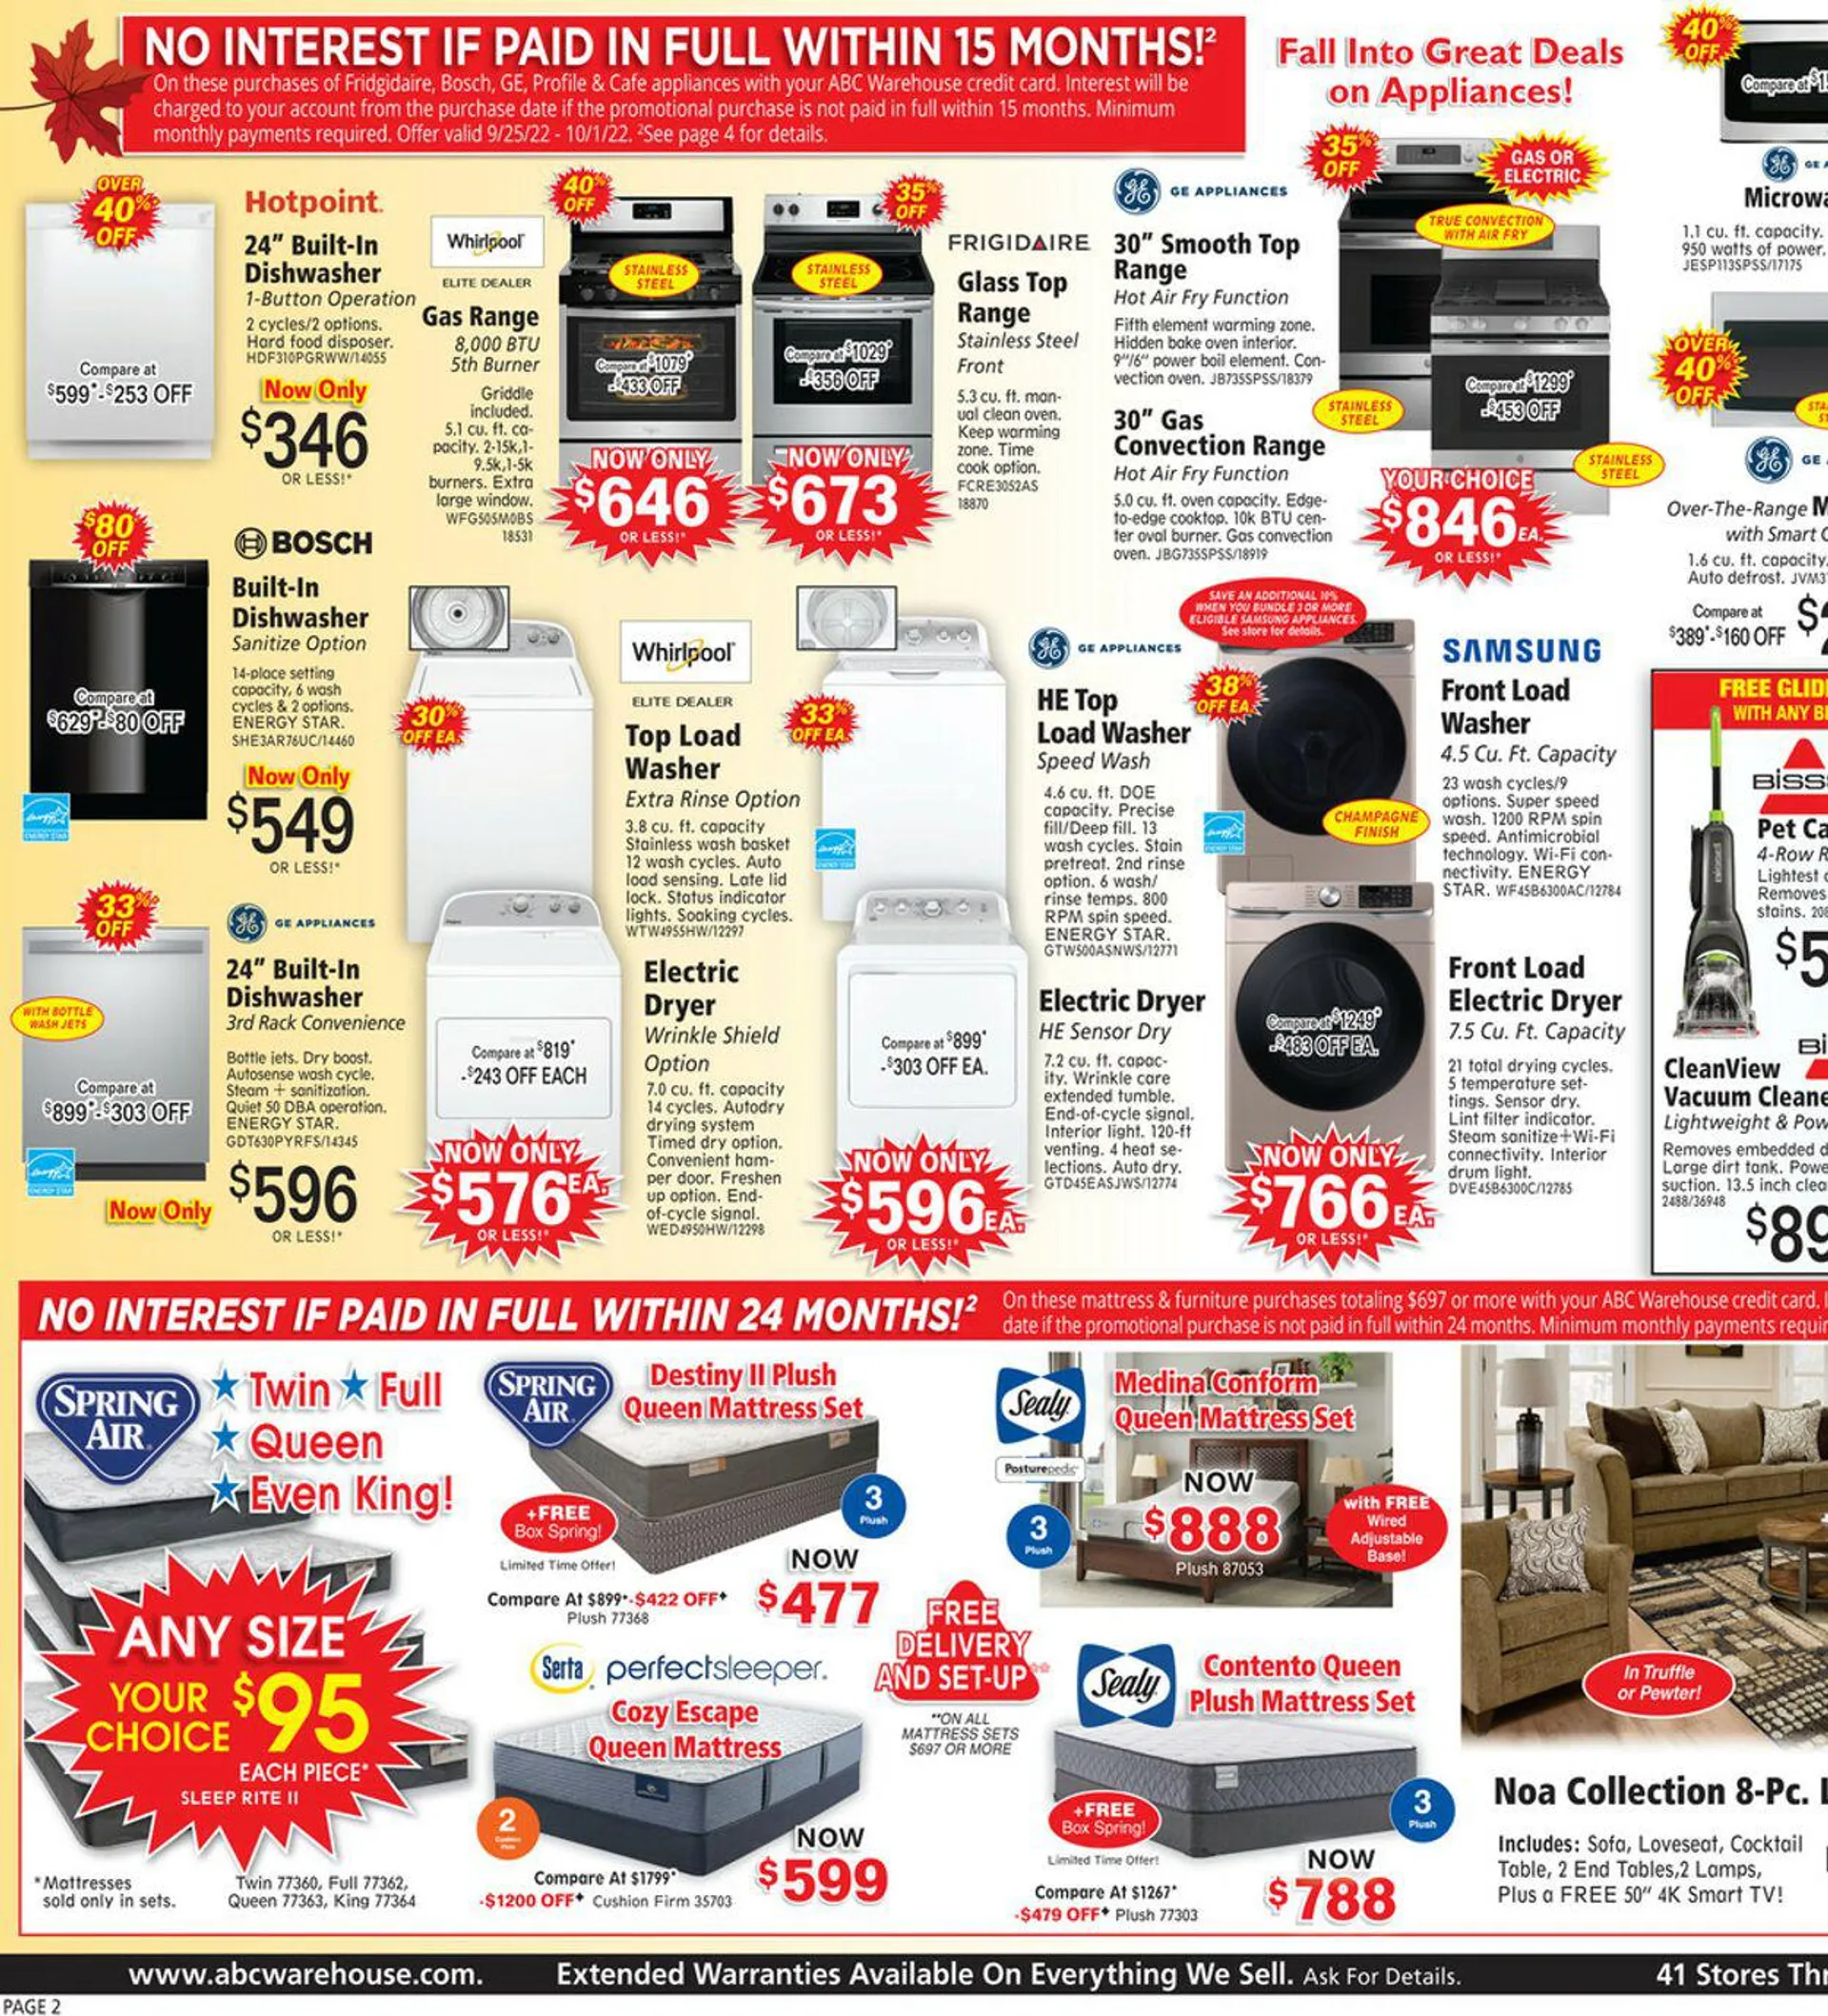 ABC Warehouse Current weekly ad - 2